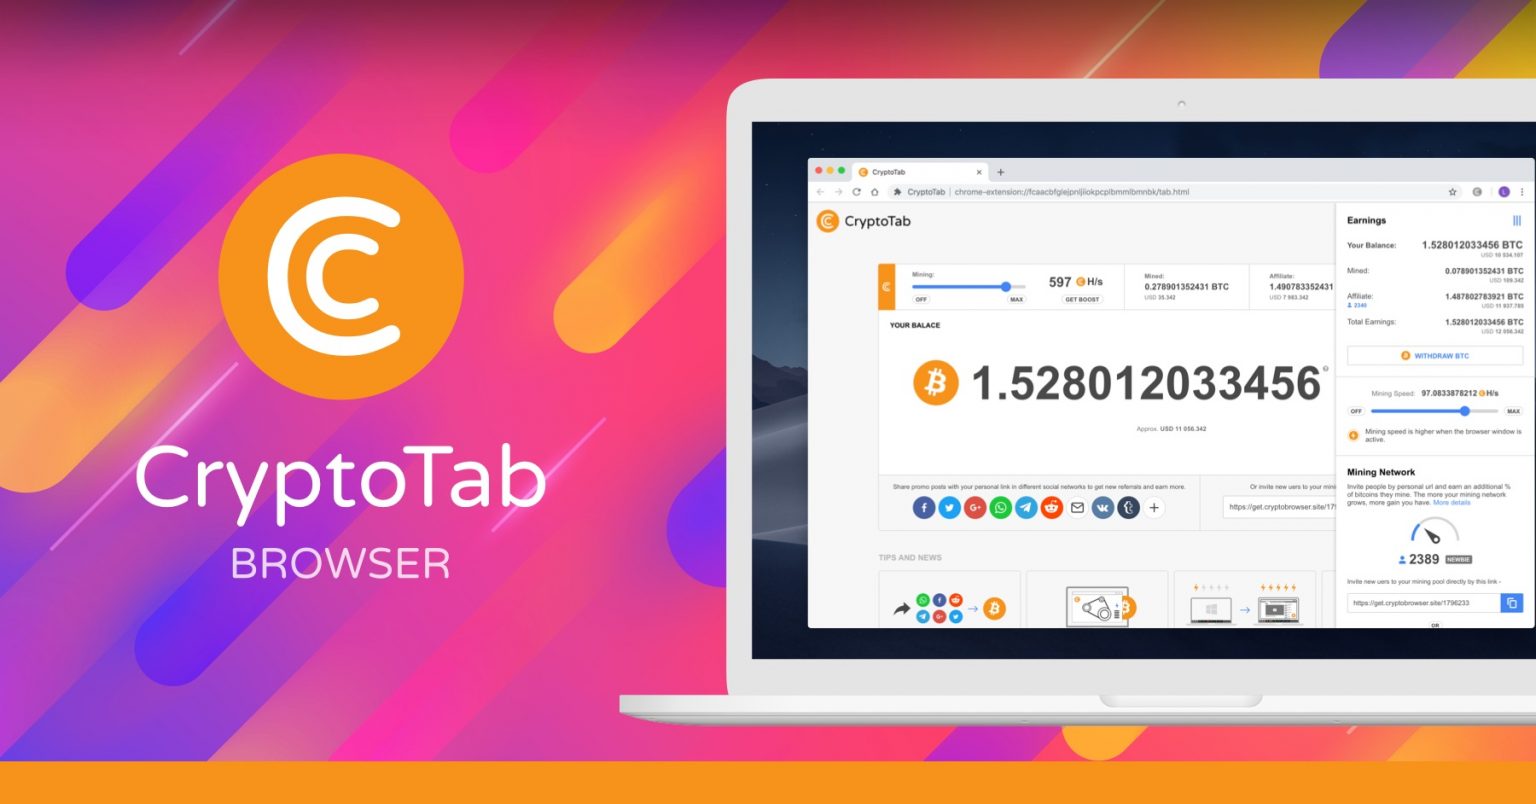 You to mine Bitcoins and grow your income | CryptoTab Browser